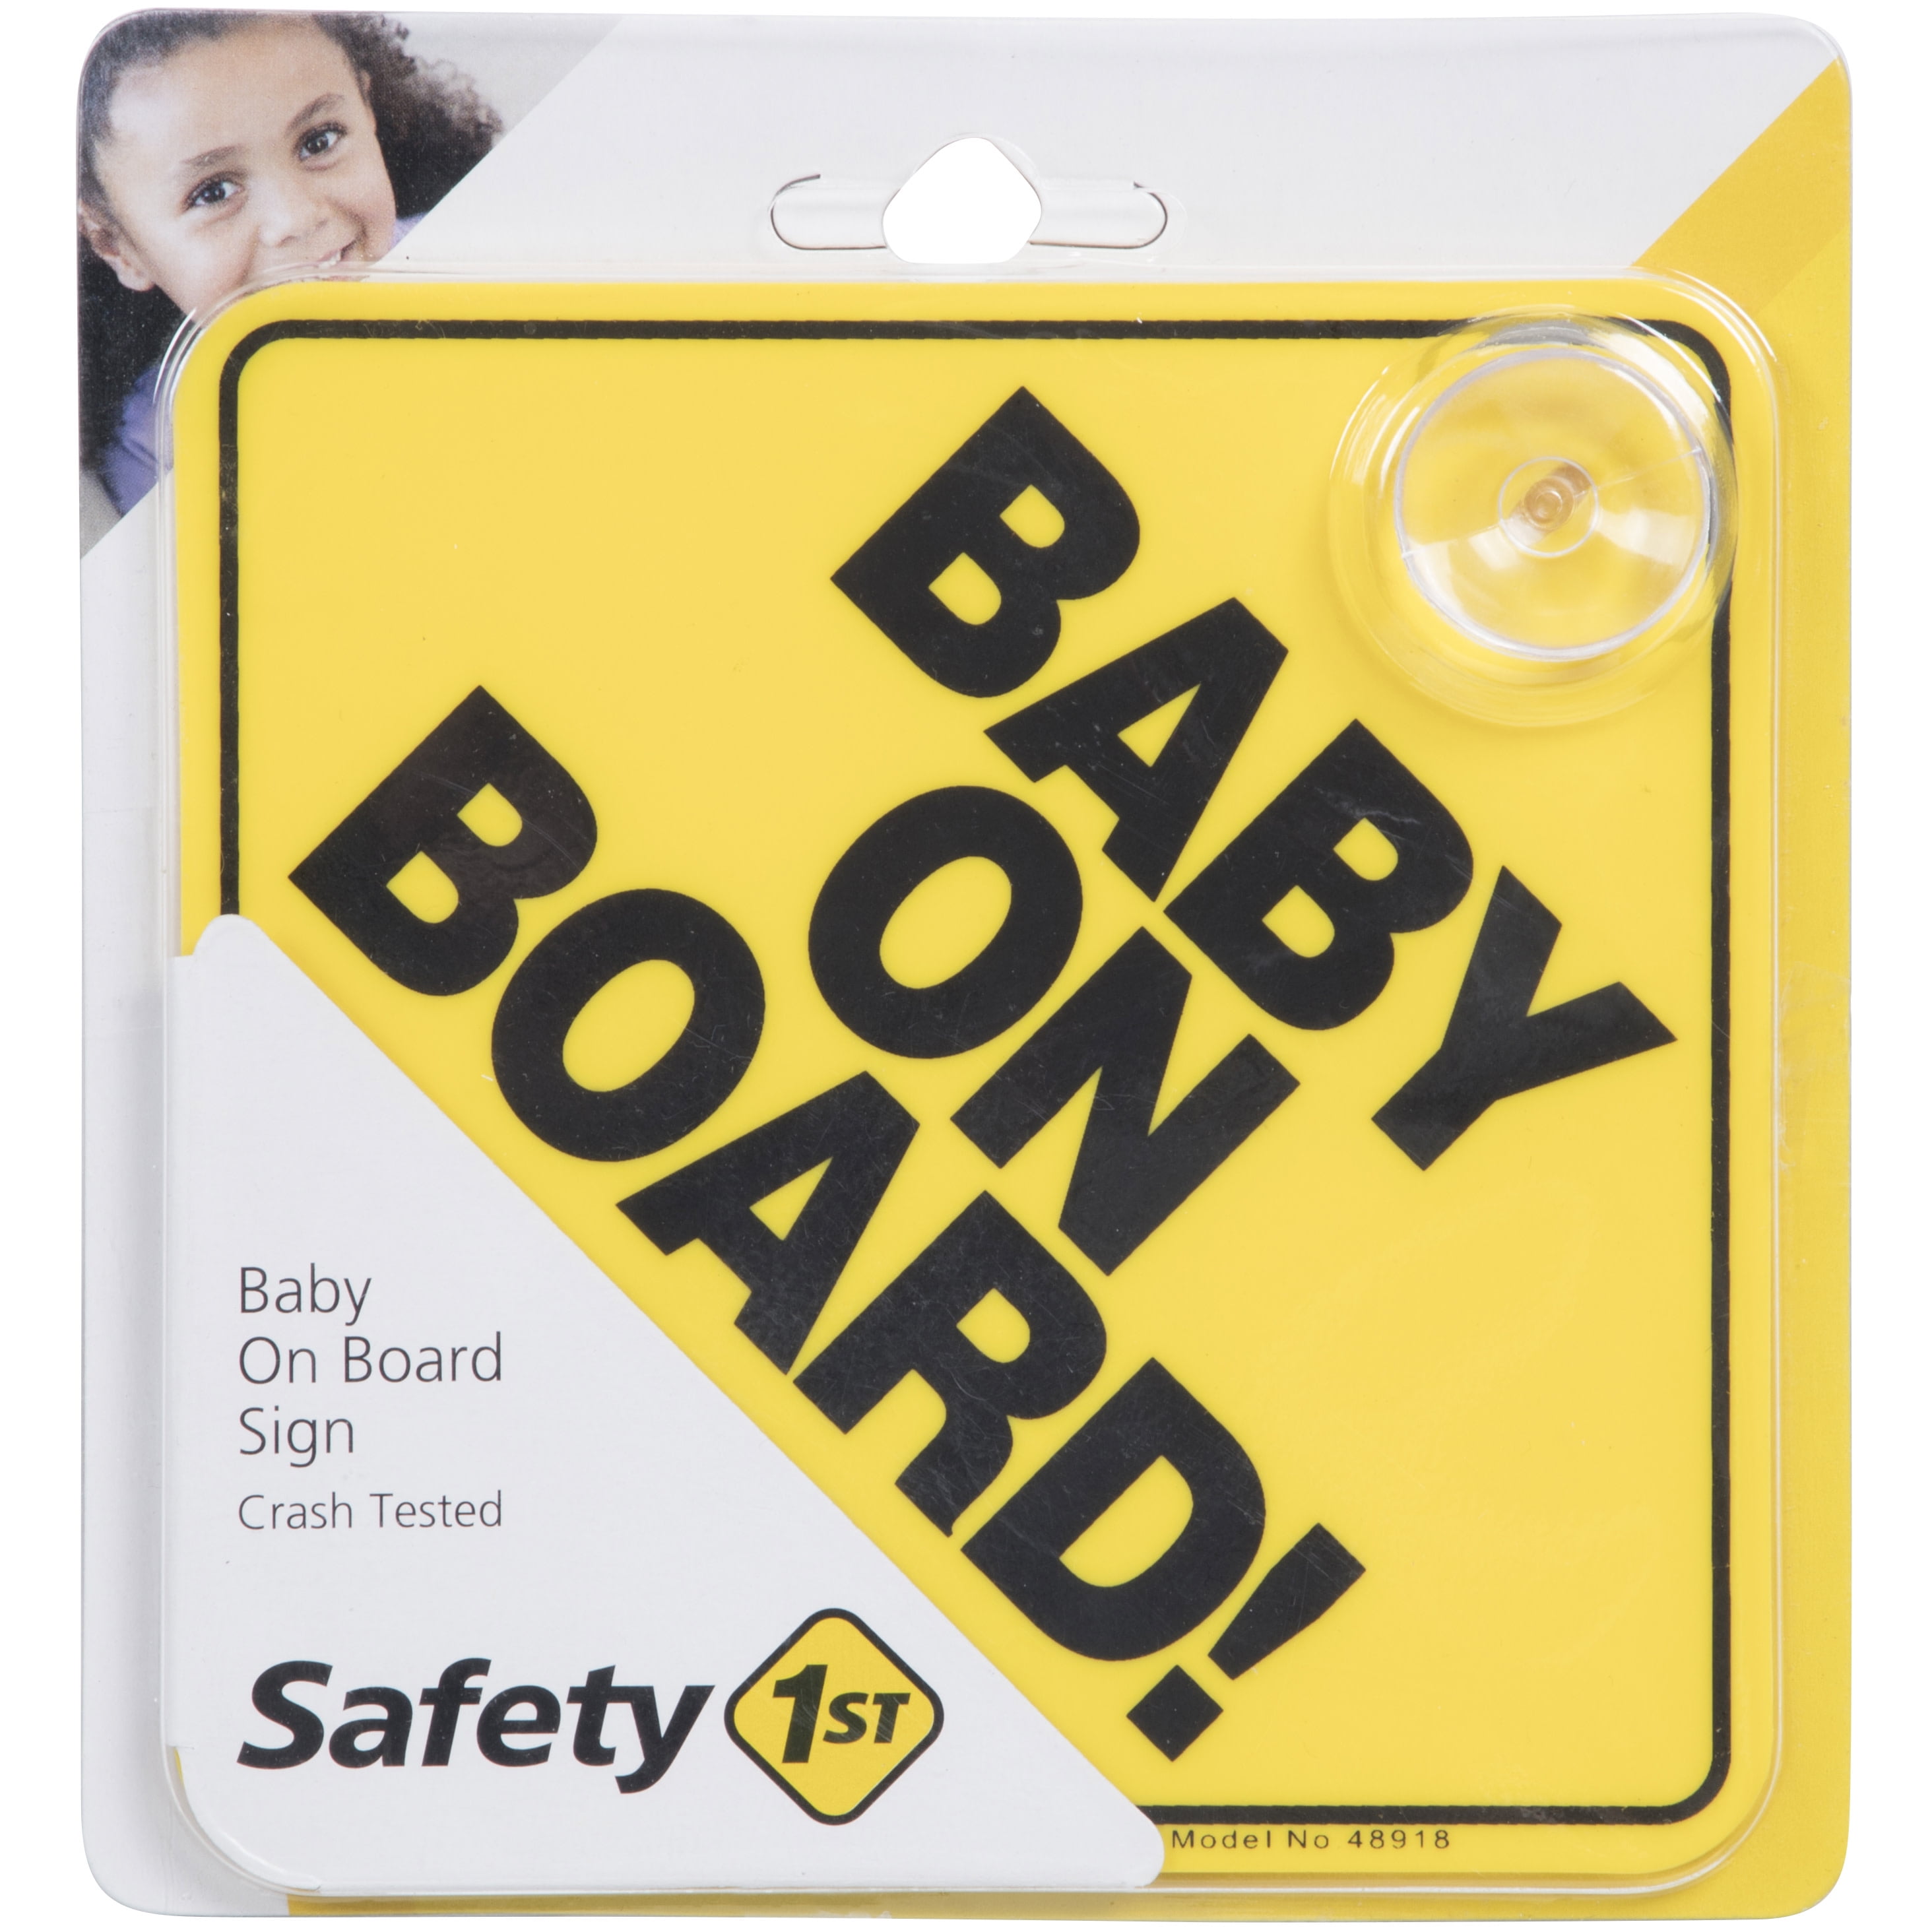 Safety 1ˢᵗ Baby On Board Sign, Yellow